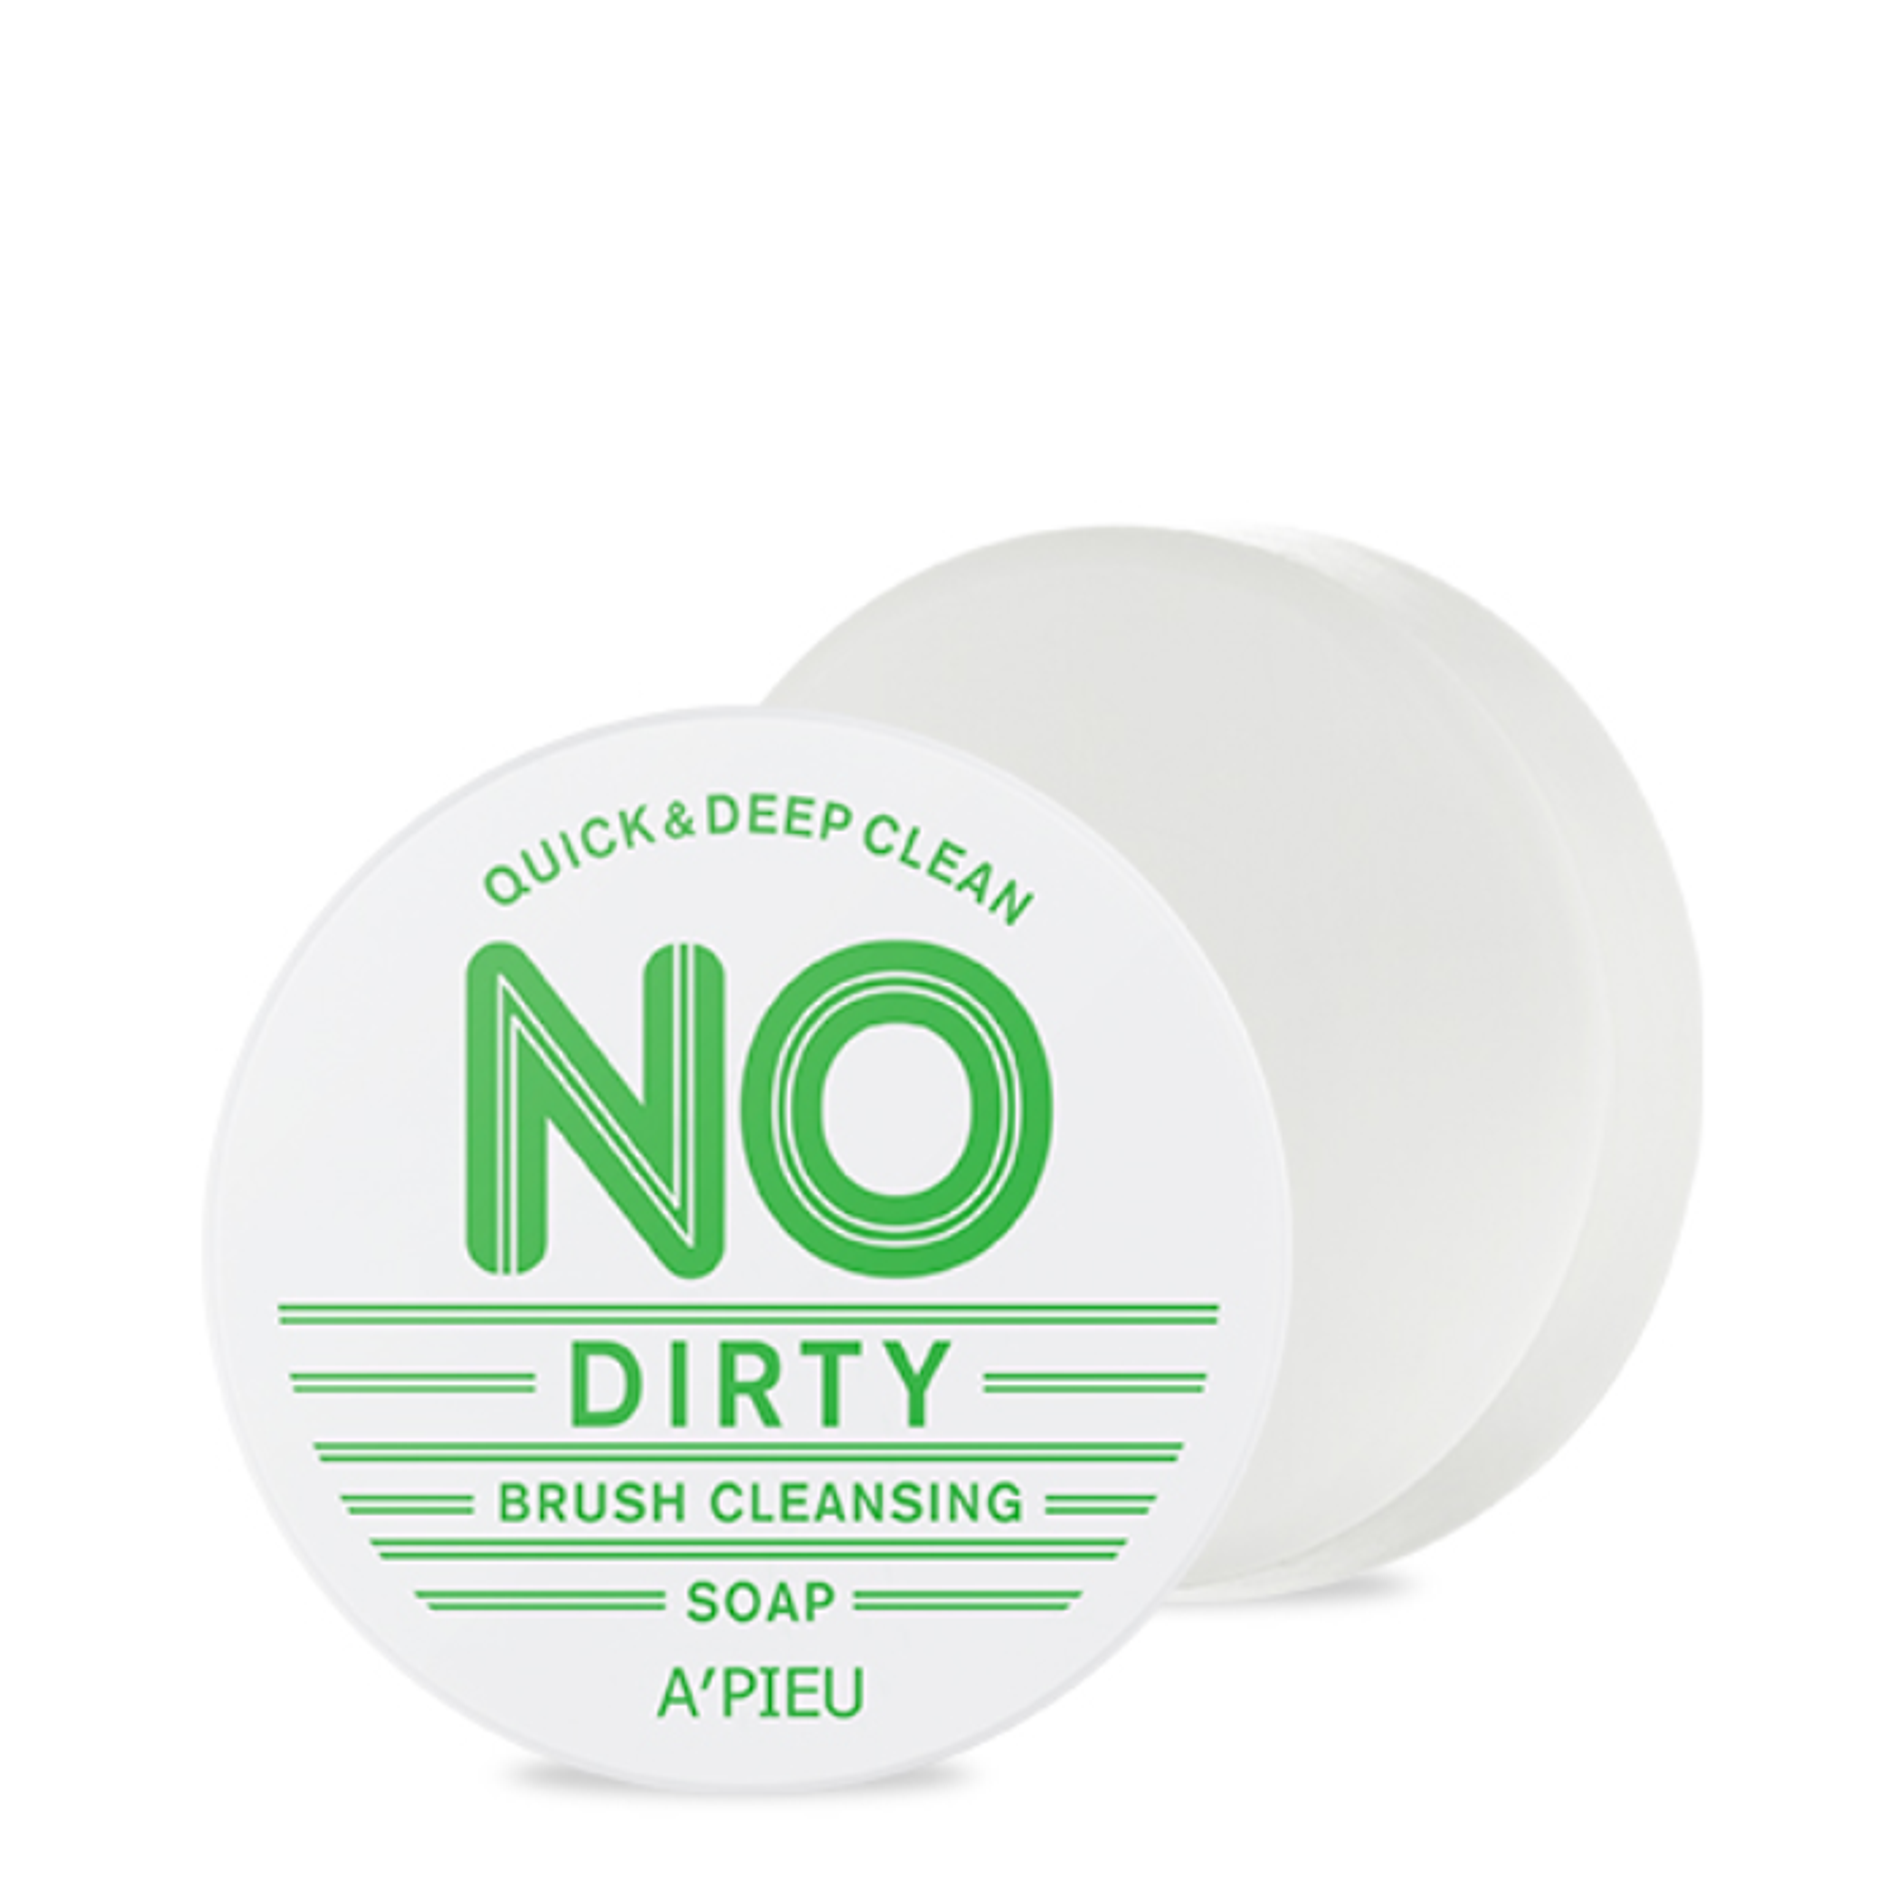 dung-cu-lam-sach-co-a-pieu-no-dirty-brush-cleansing-soap-47g-4